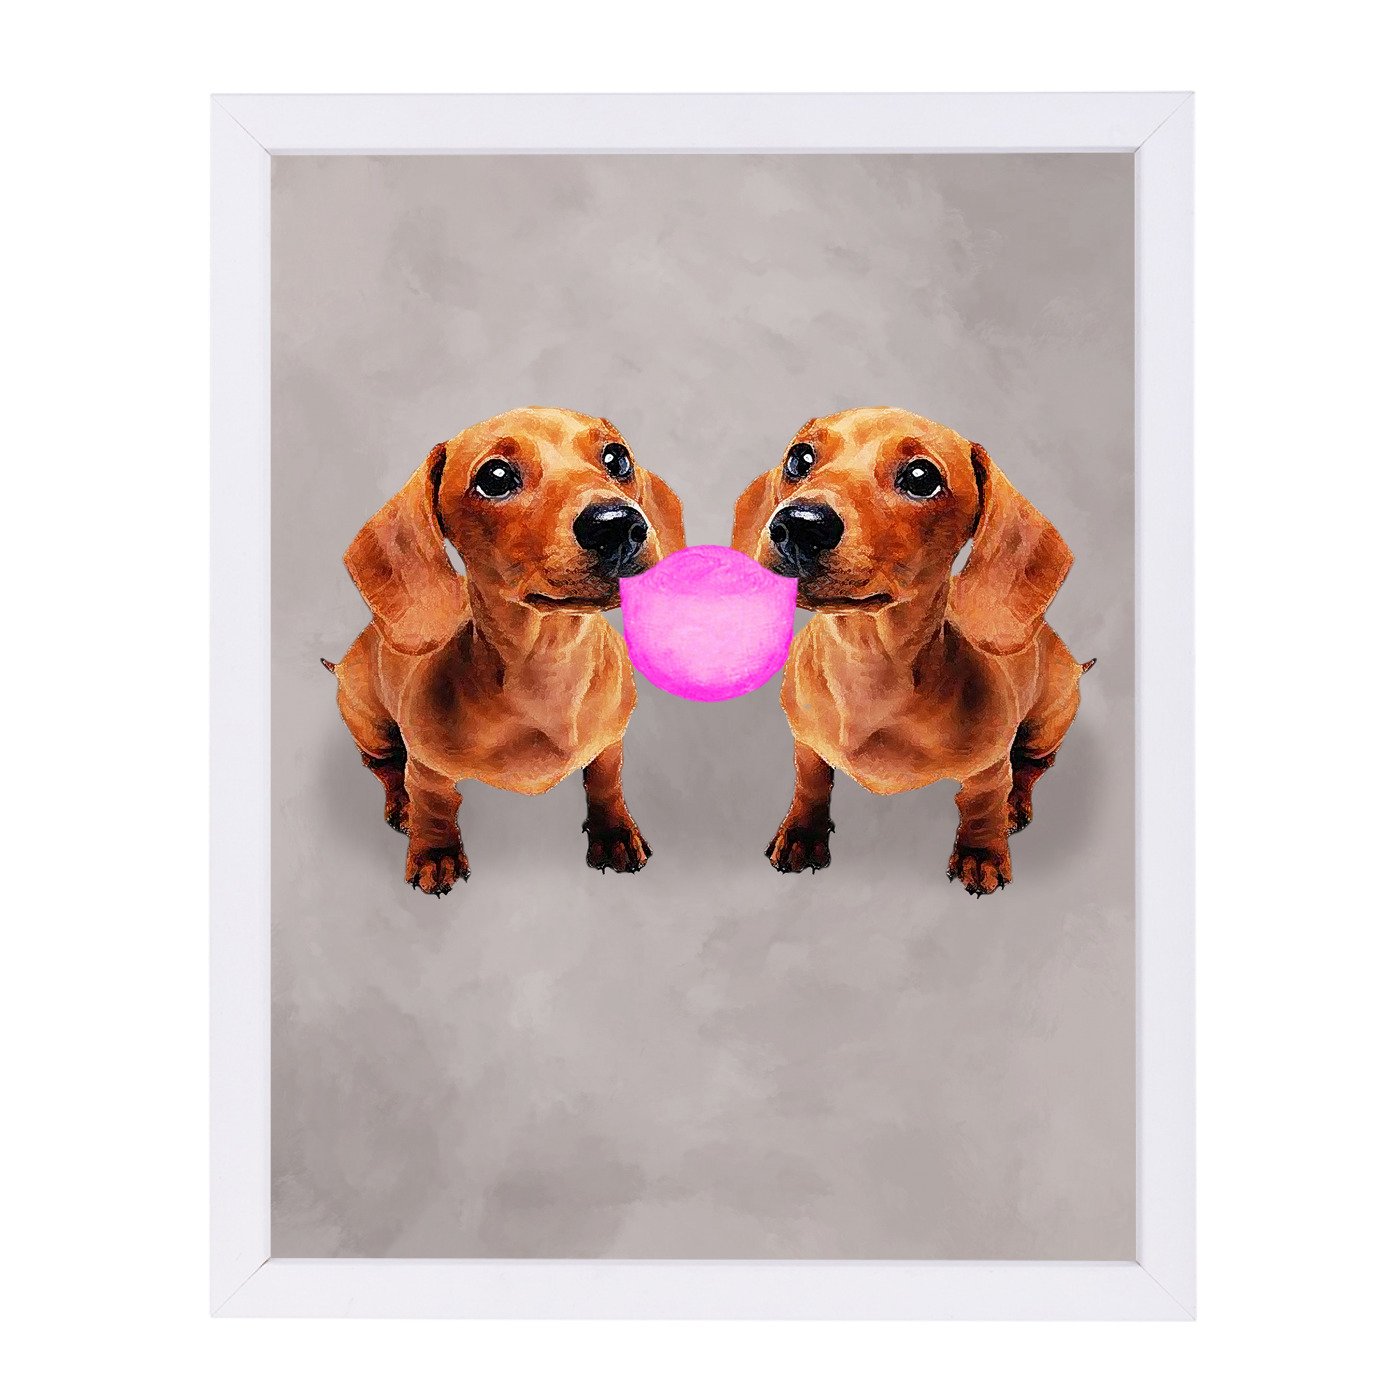 Dachshunds With Bubblegum By Coco De Paris - Framed Print - Americanflat